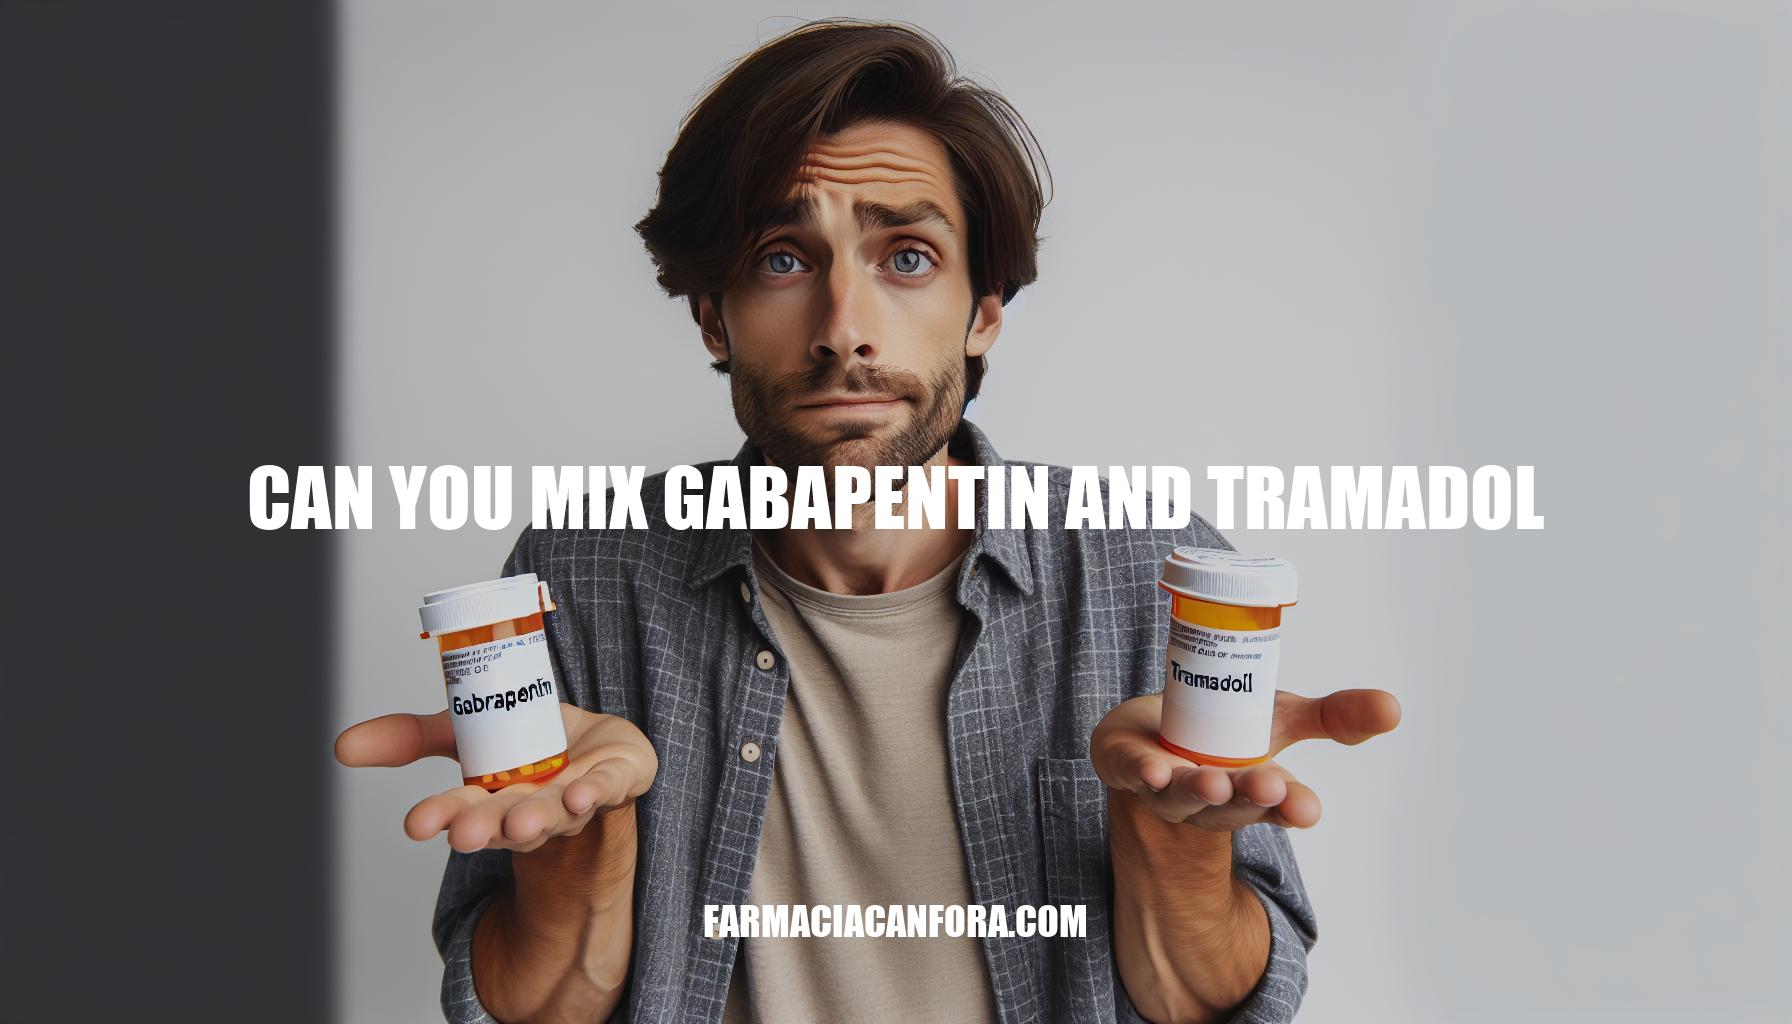 Can You Mix Gabapentin and Tramadol: Safety Guide